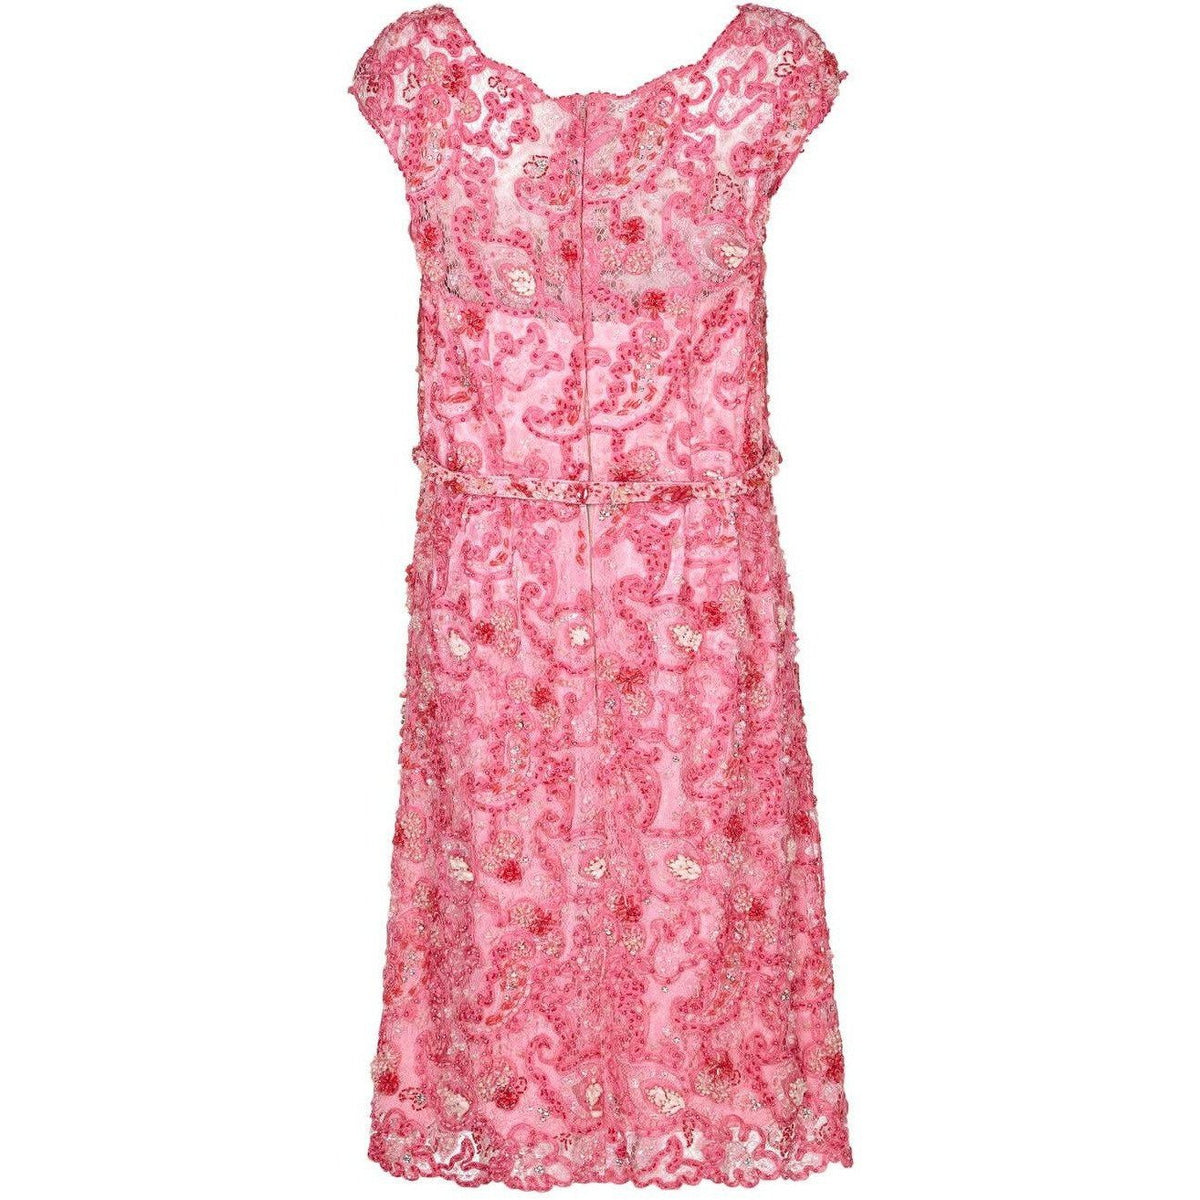 ARCHIVE - 1960s Norman Hartnell Couture Pink Beaded Dress Owned by Dam